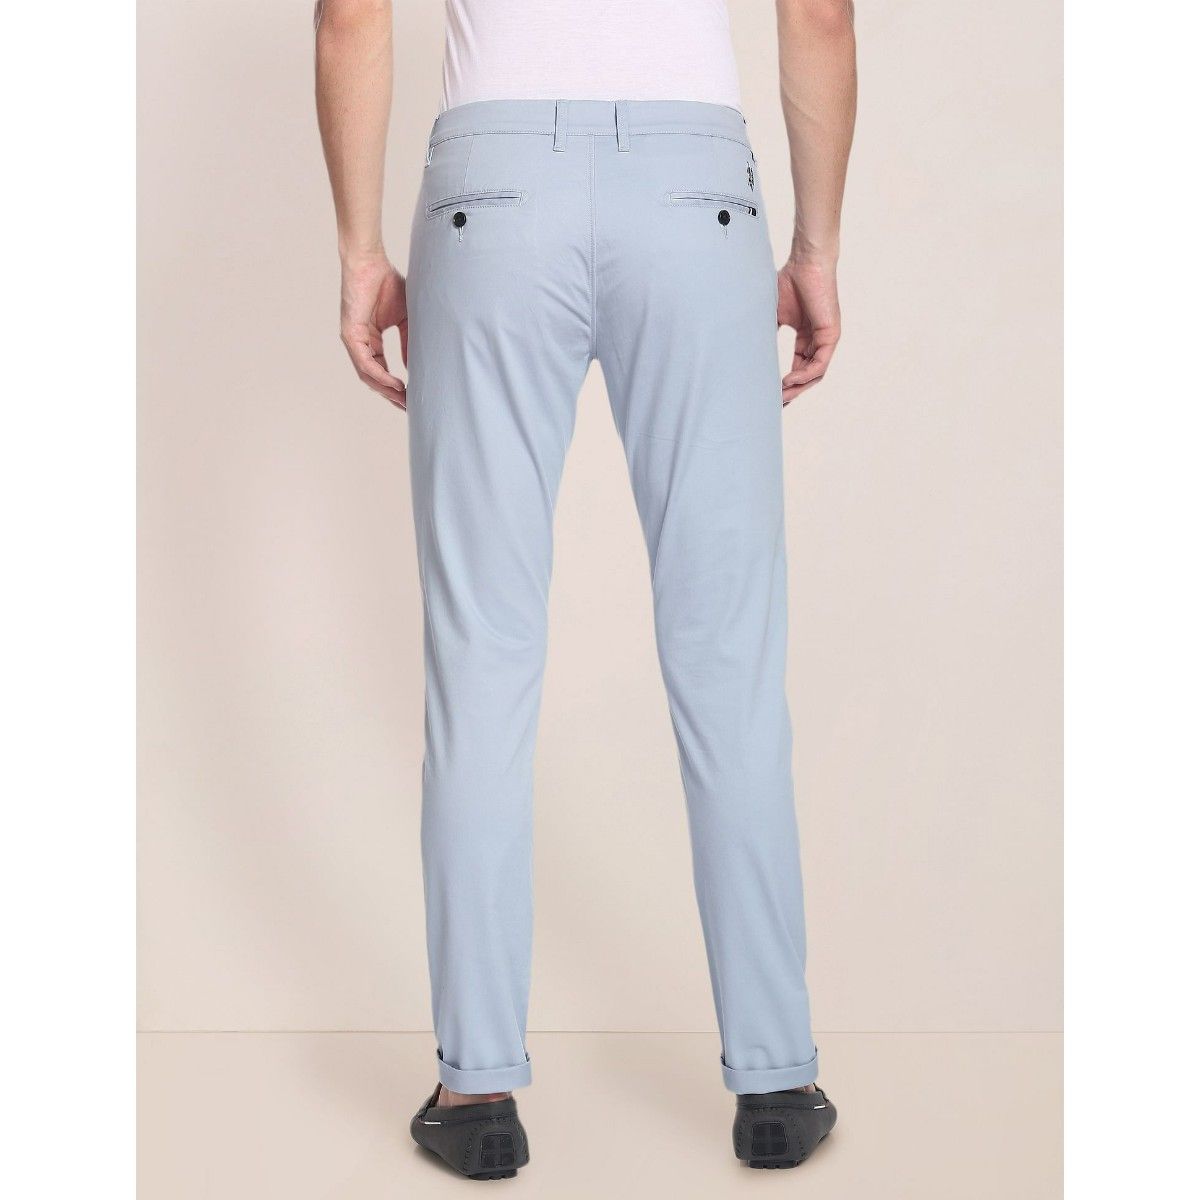 Buy U.S. POLO ASSN. Solid Flat Front Trousers online